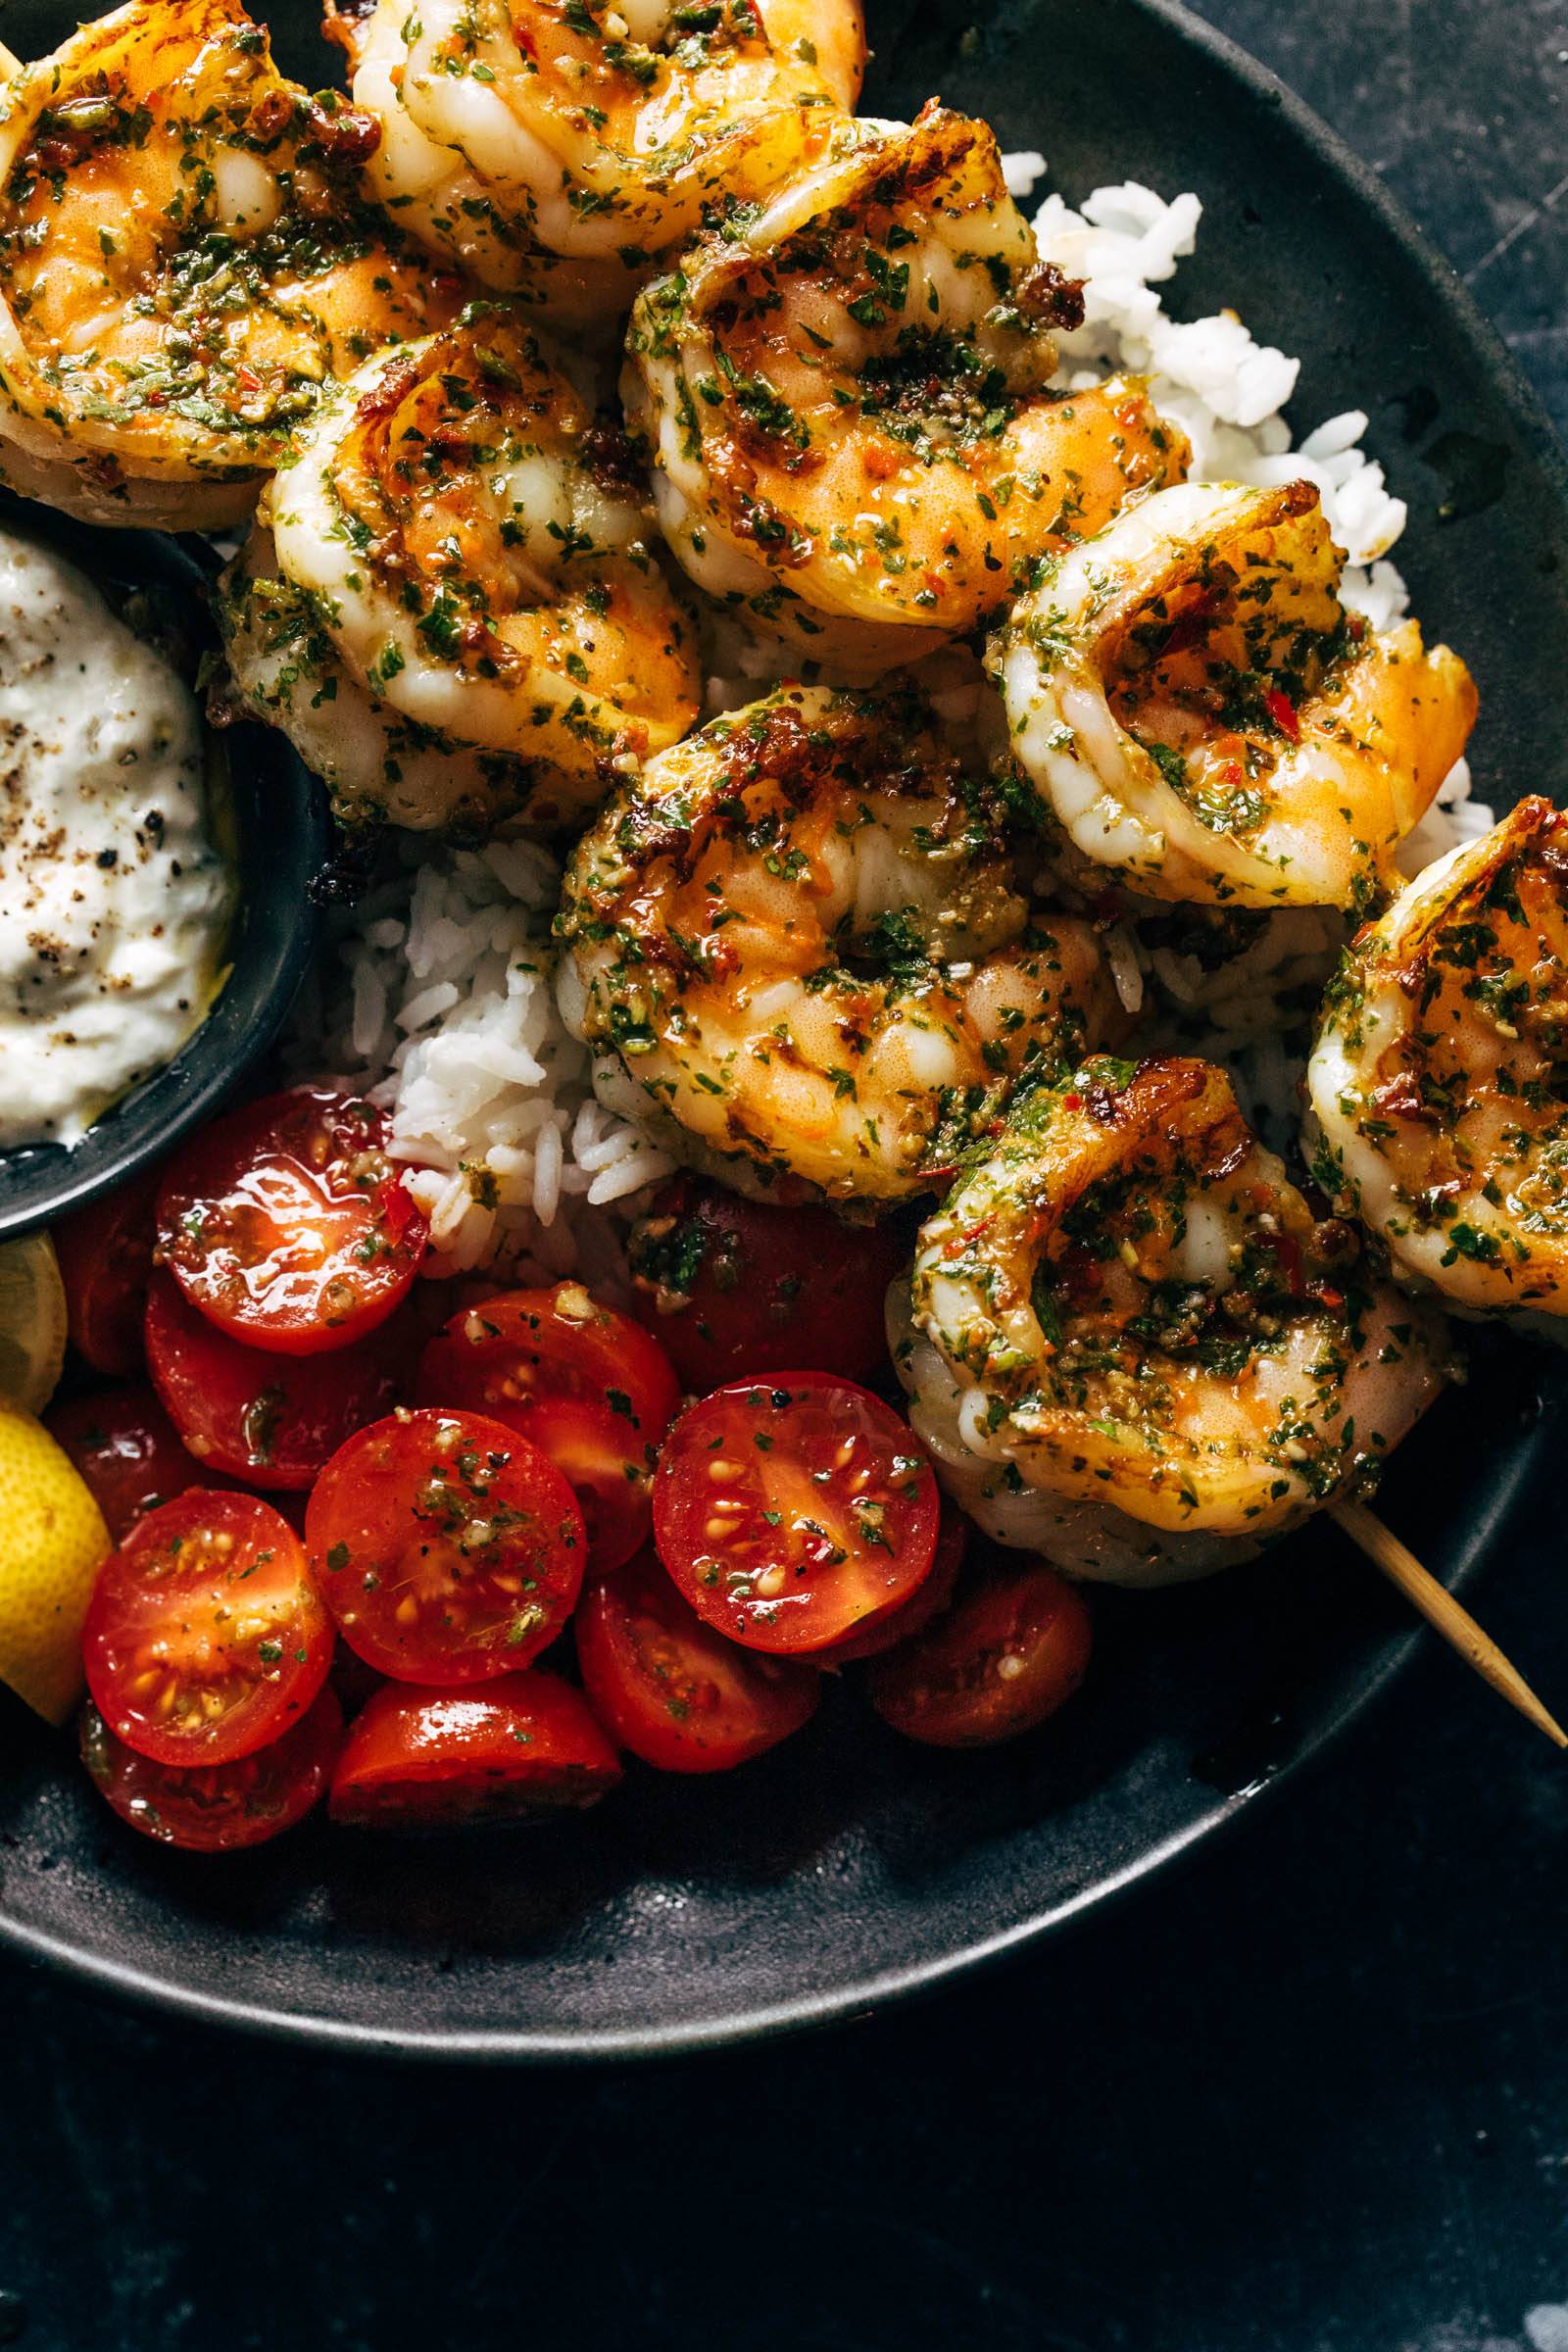 Shrimp on skewers, tomatoes, rice, and tzatziki on a plate.